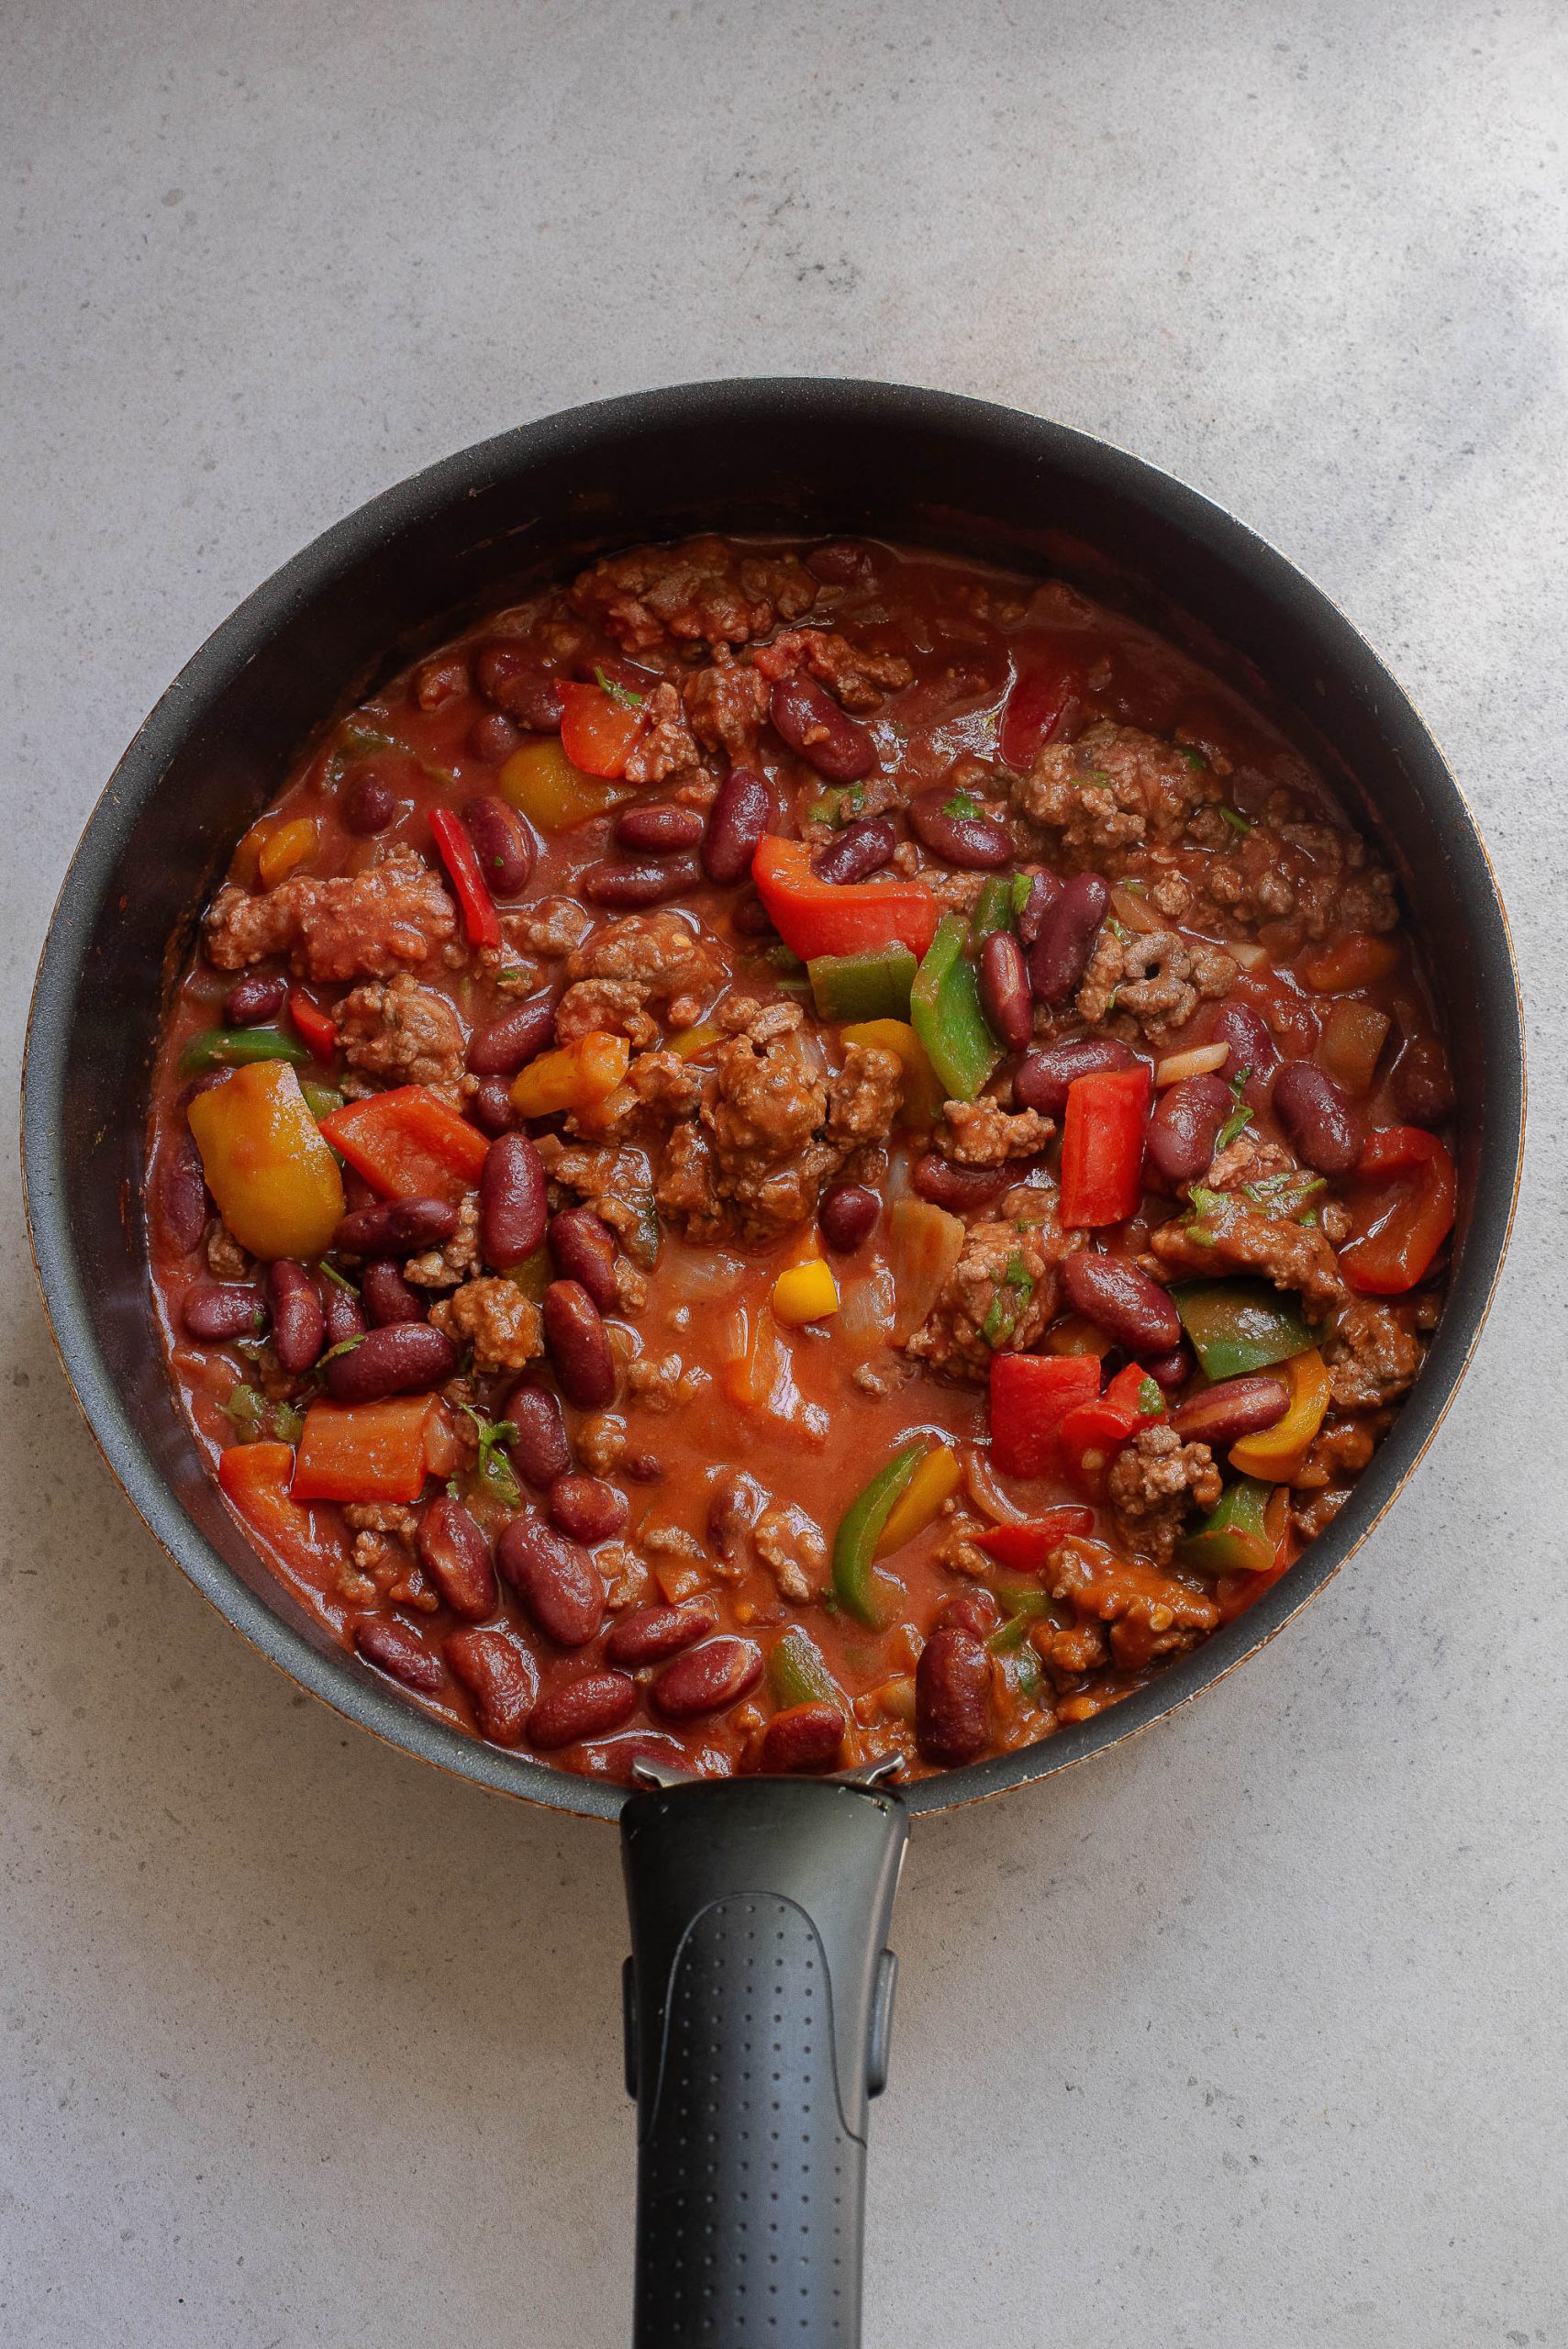 A frying pan filled with chili, beans and peppers.